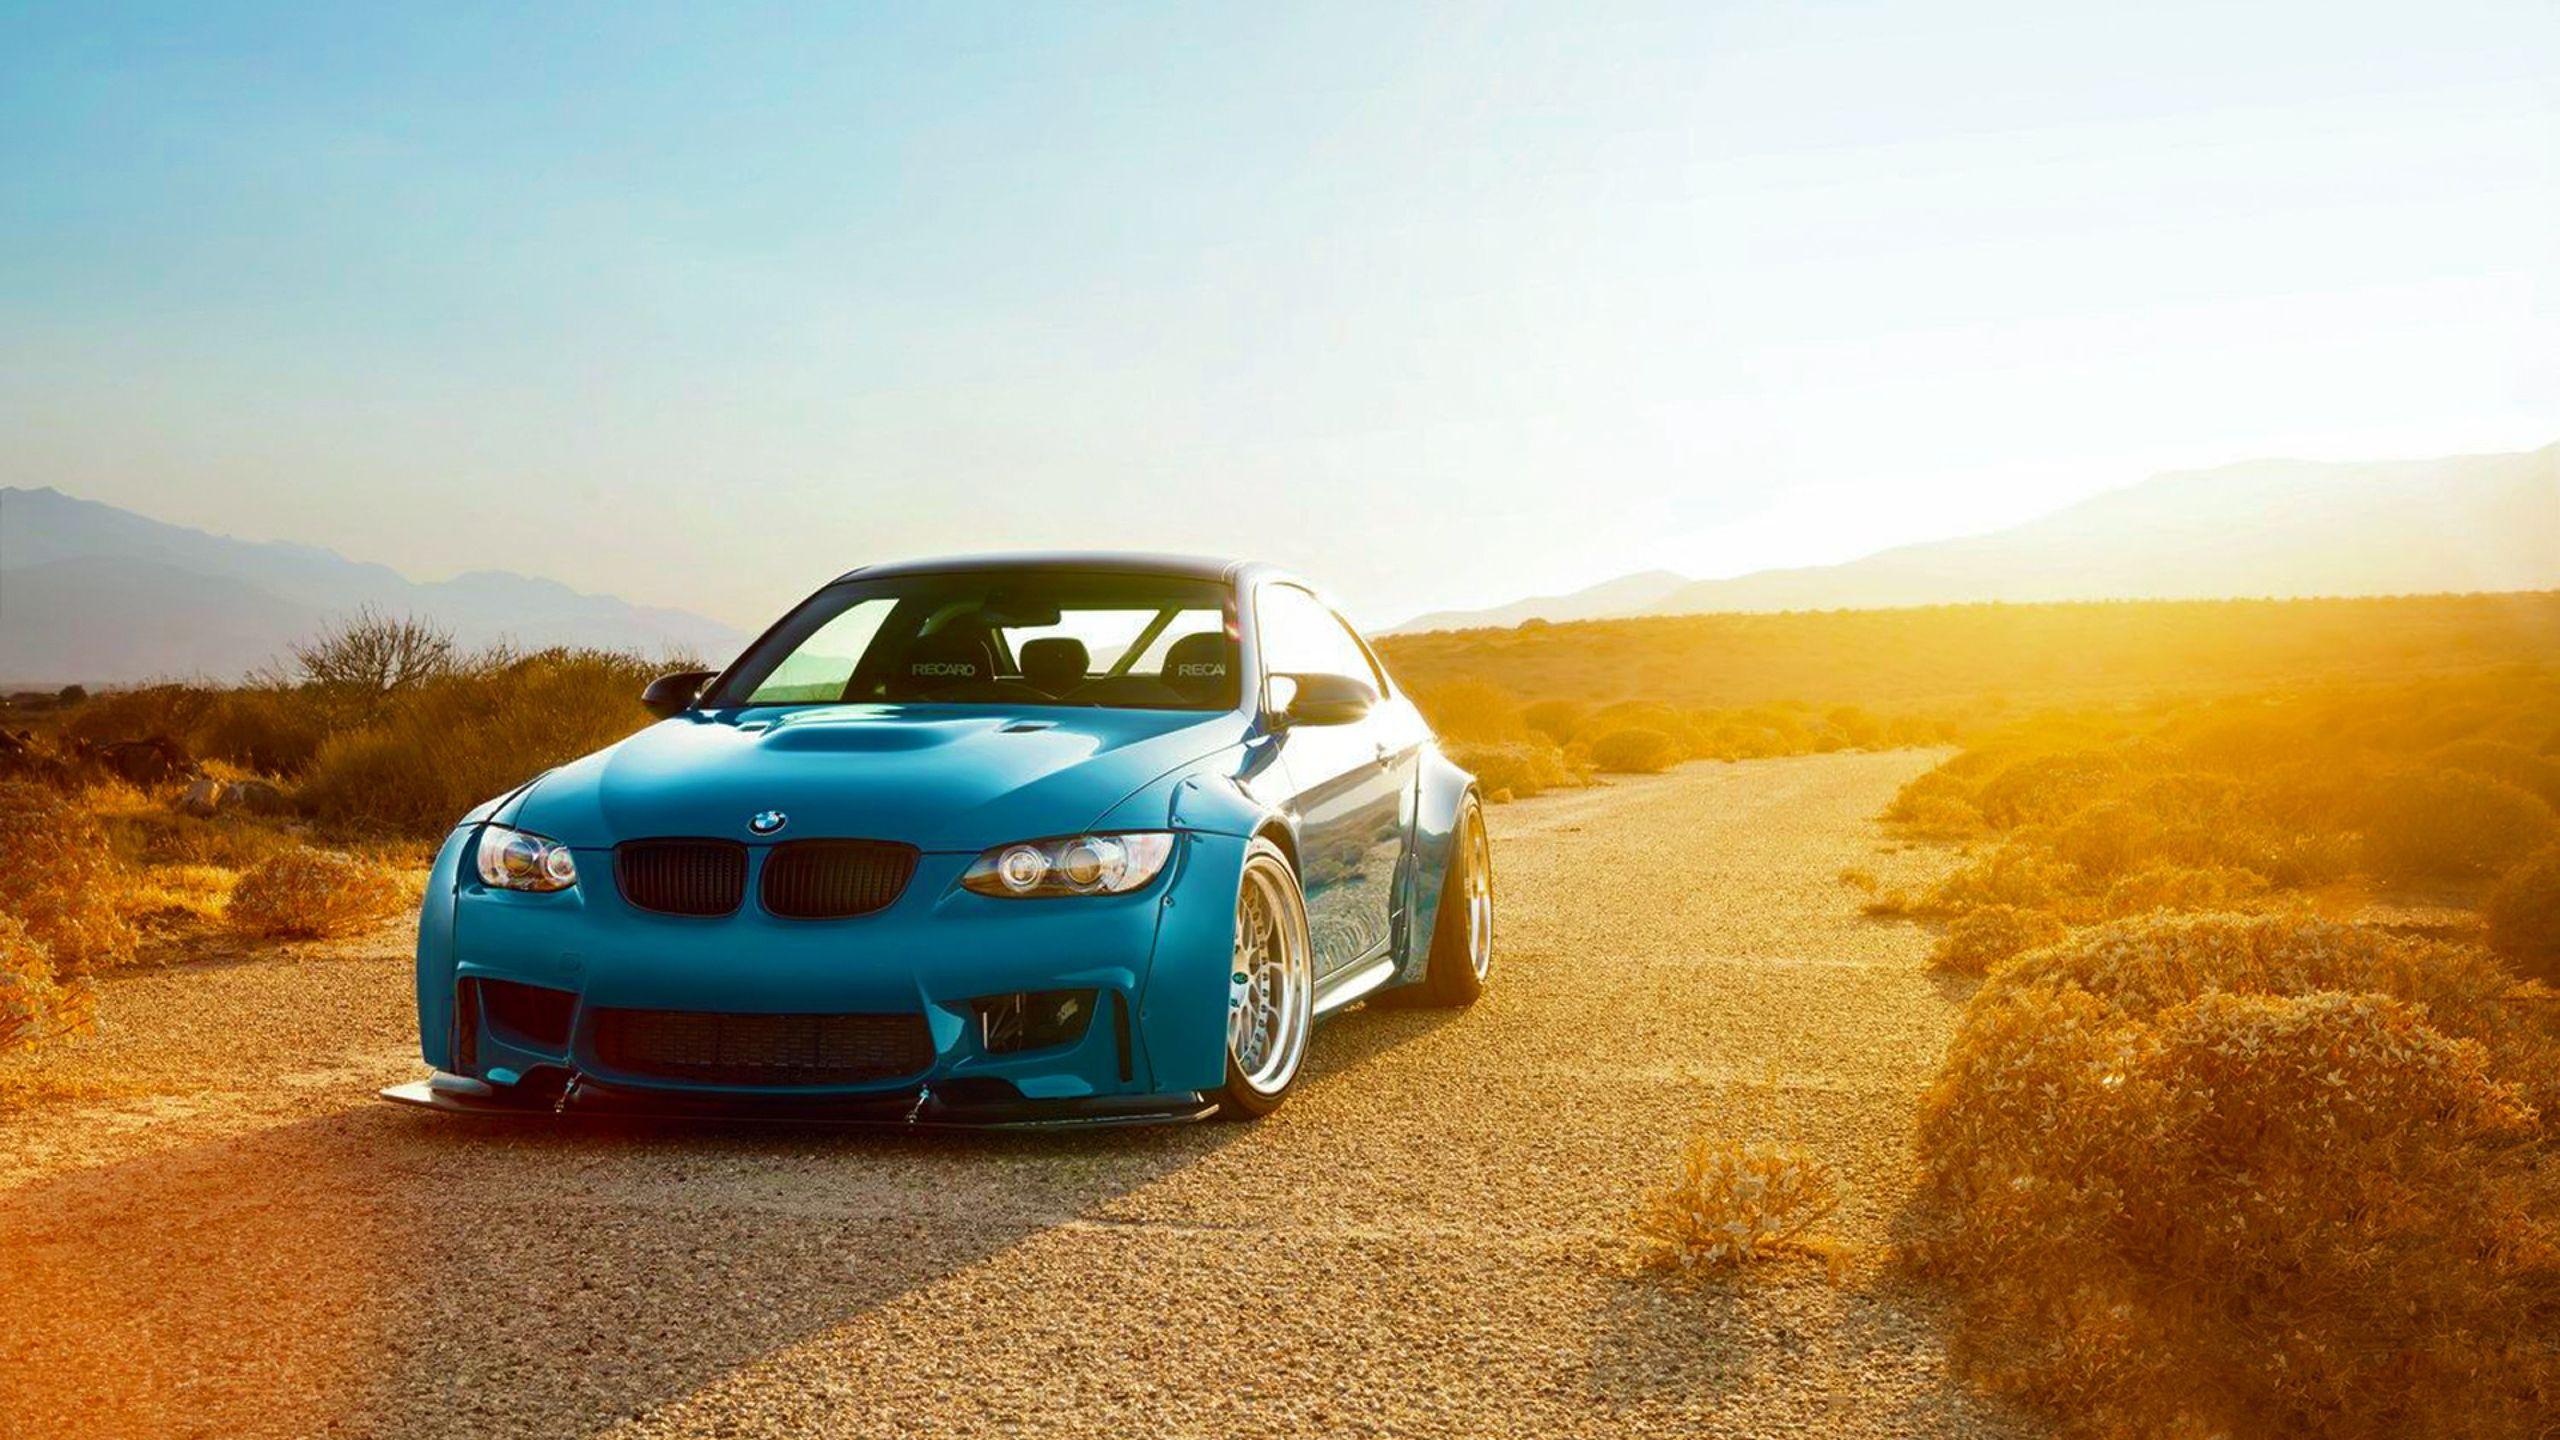 Blue Bmw M3 Wallpapers Top Free Blue Bmw M3 Backgrounds Wallpaperaccess